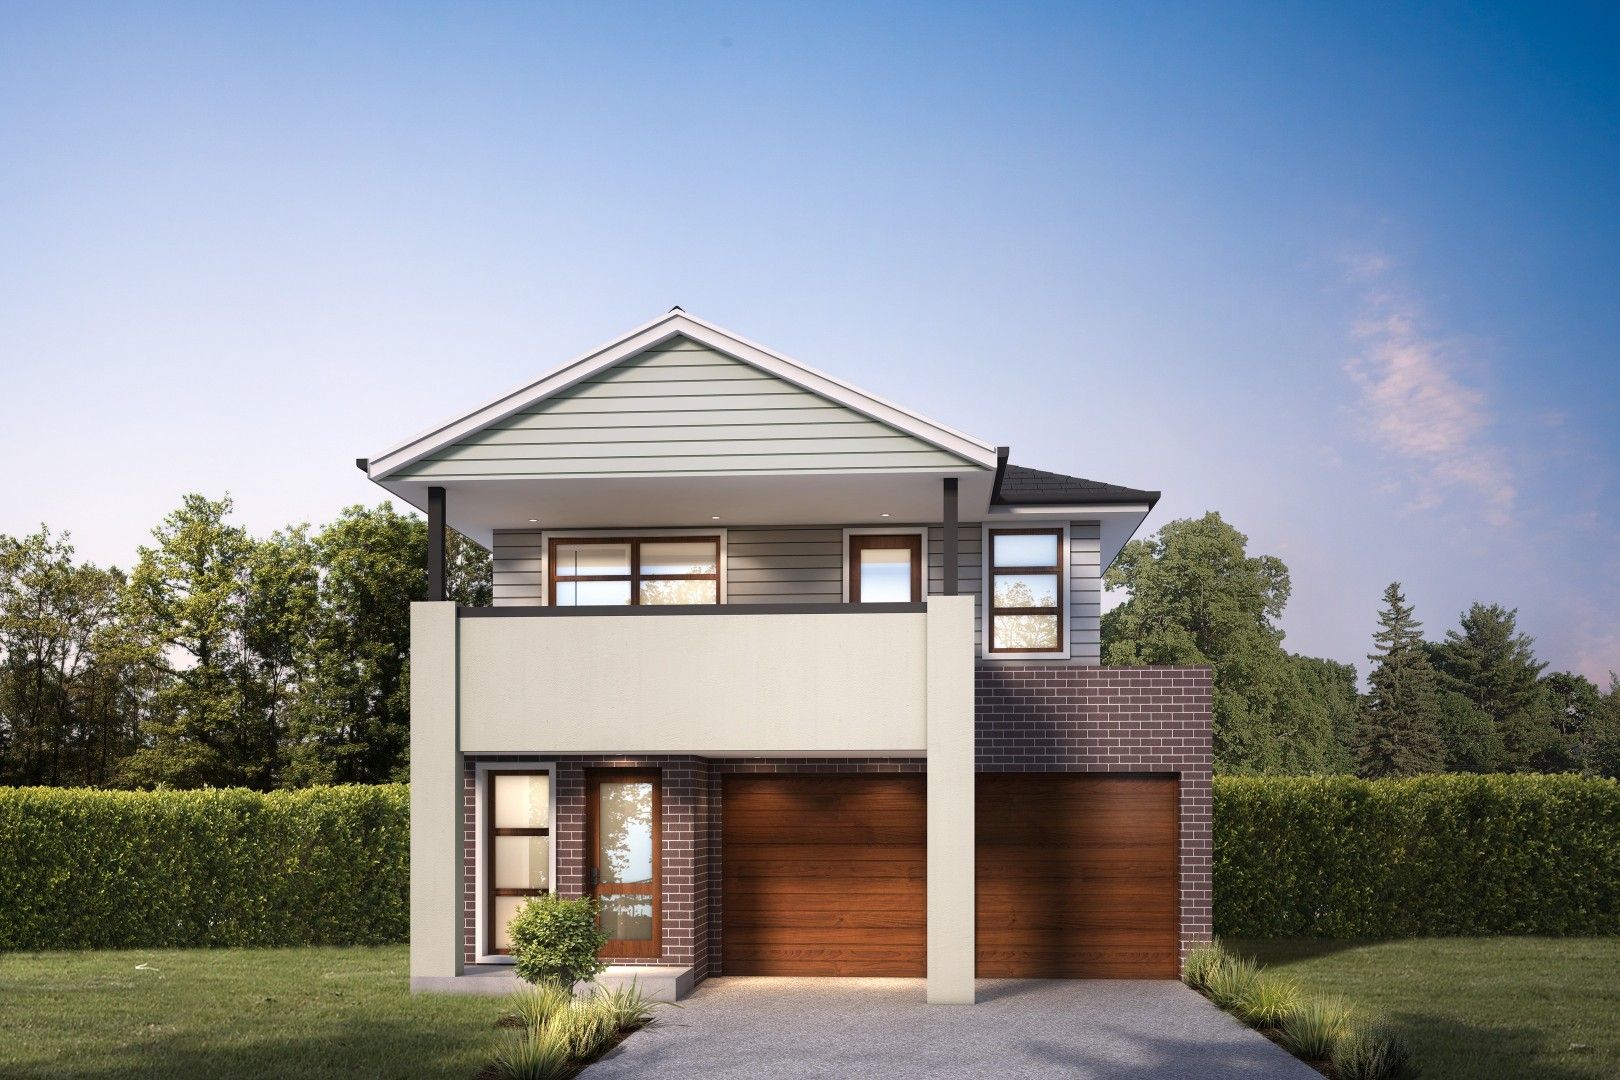 5 bedrooms New House & Land in lot 17 Proposed Road GLEDSWOOD HILLS NSW, 2557